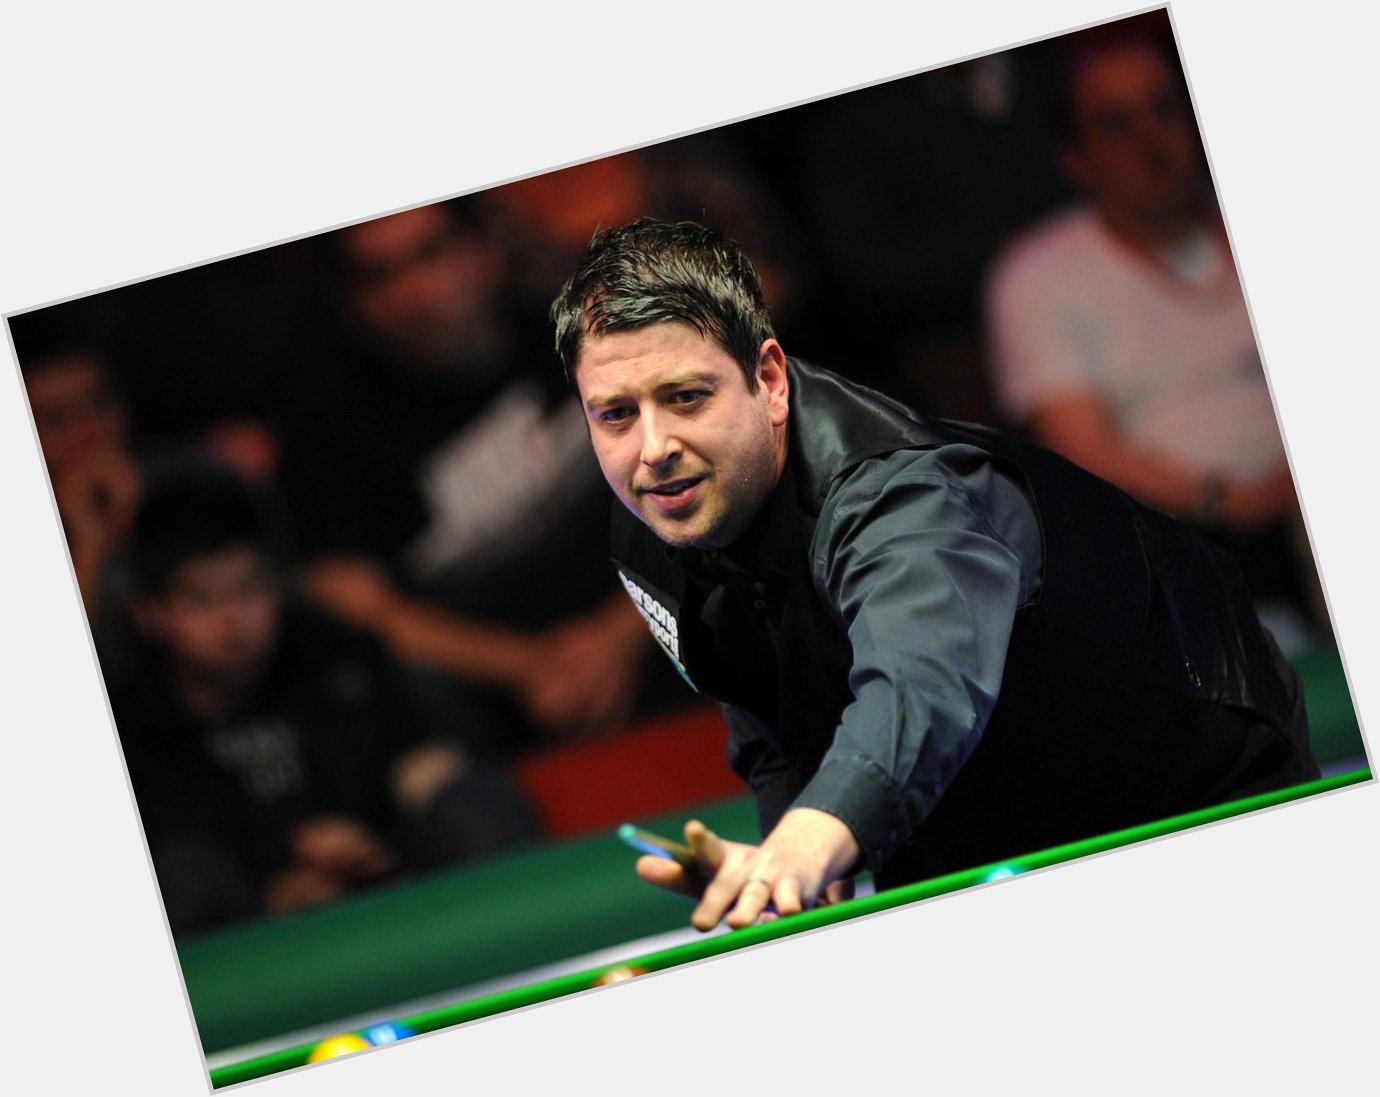 Happy Birthday to Matthew Stevens from everyone at World Snooker! 